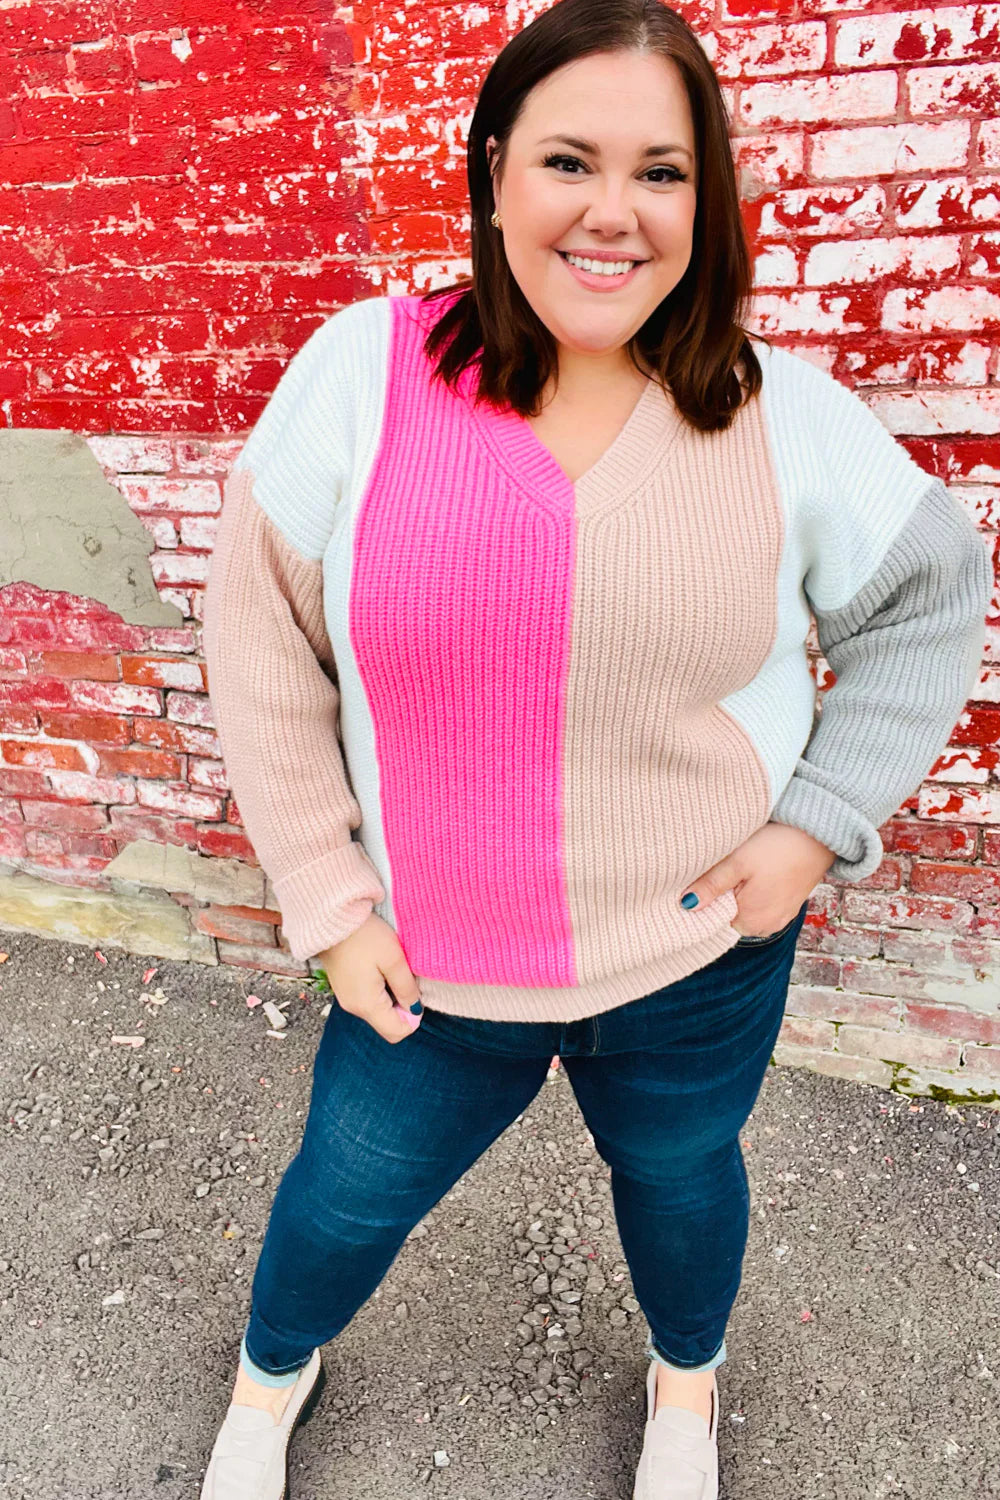 Cotton Candy Cuddles V Neck Color Block Sweater Top